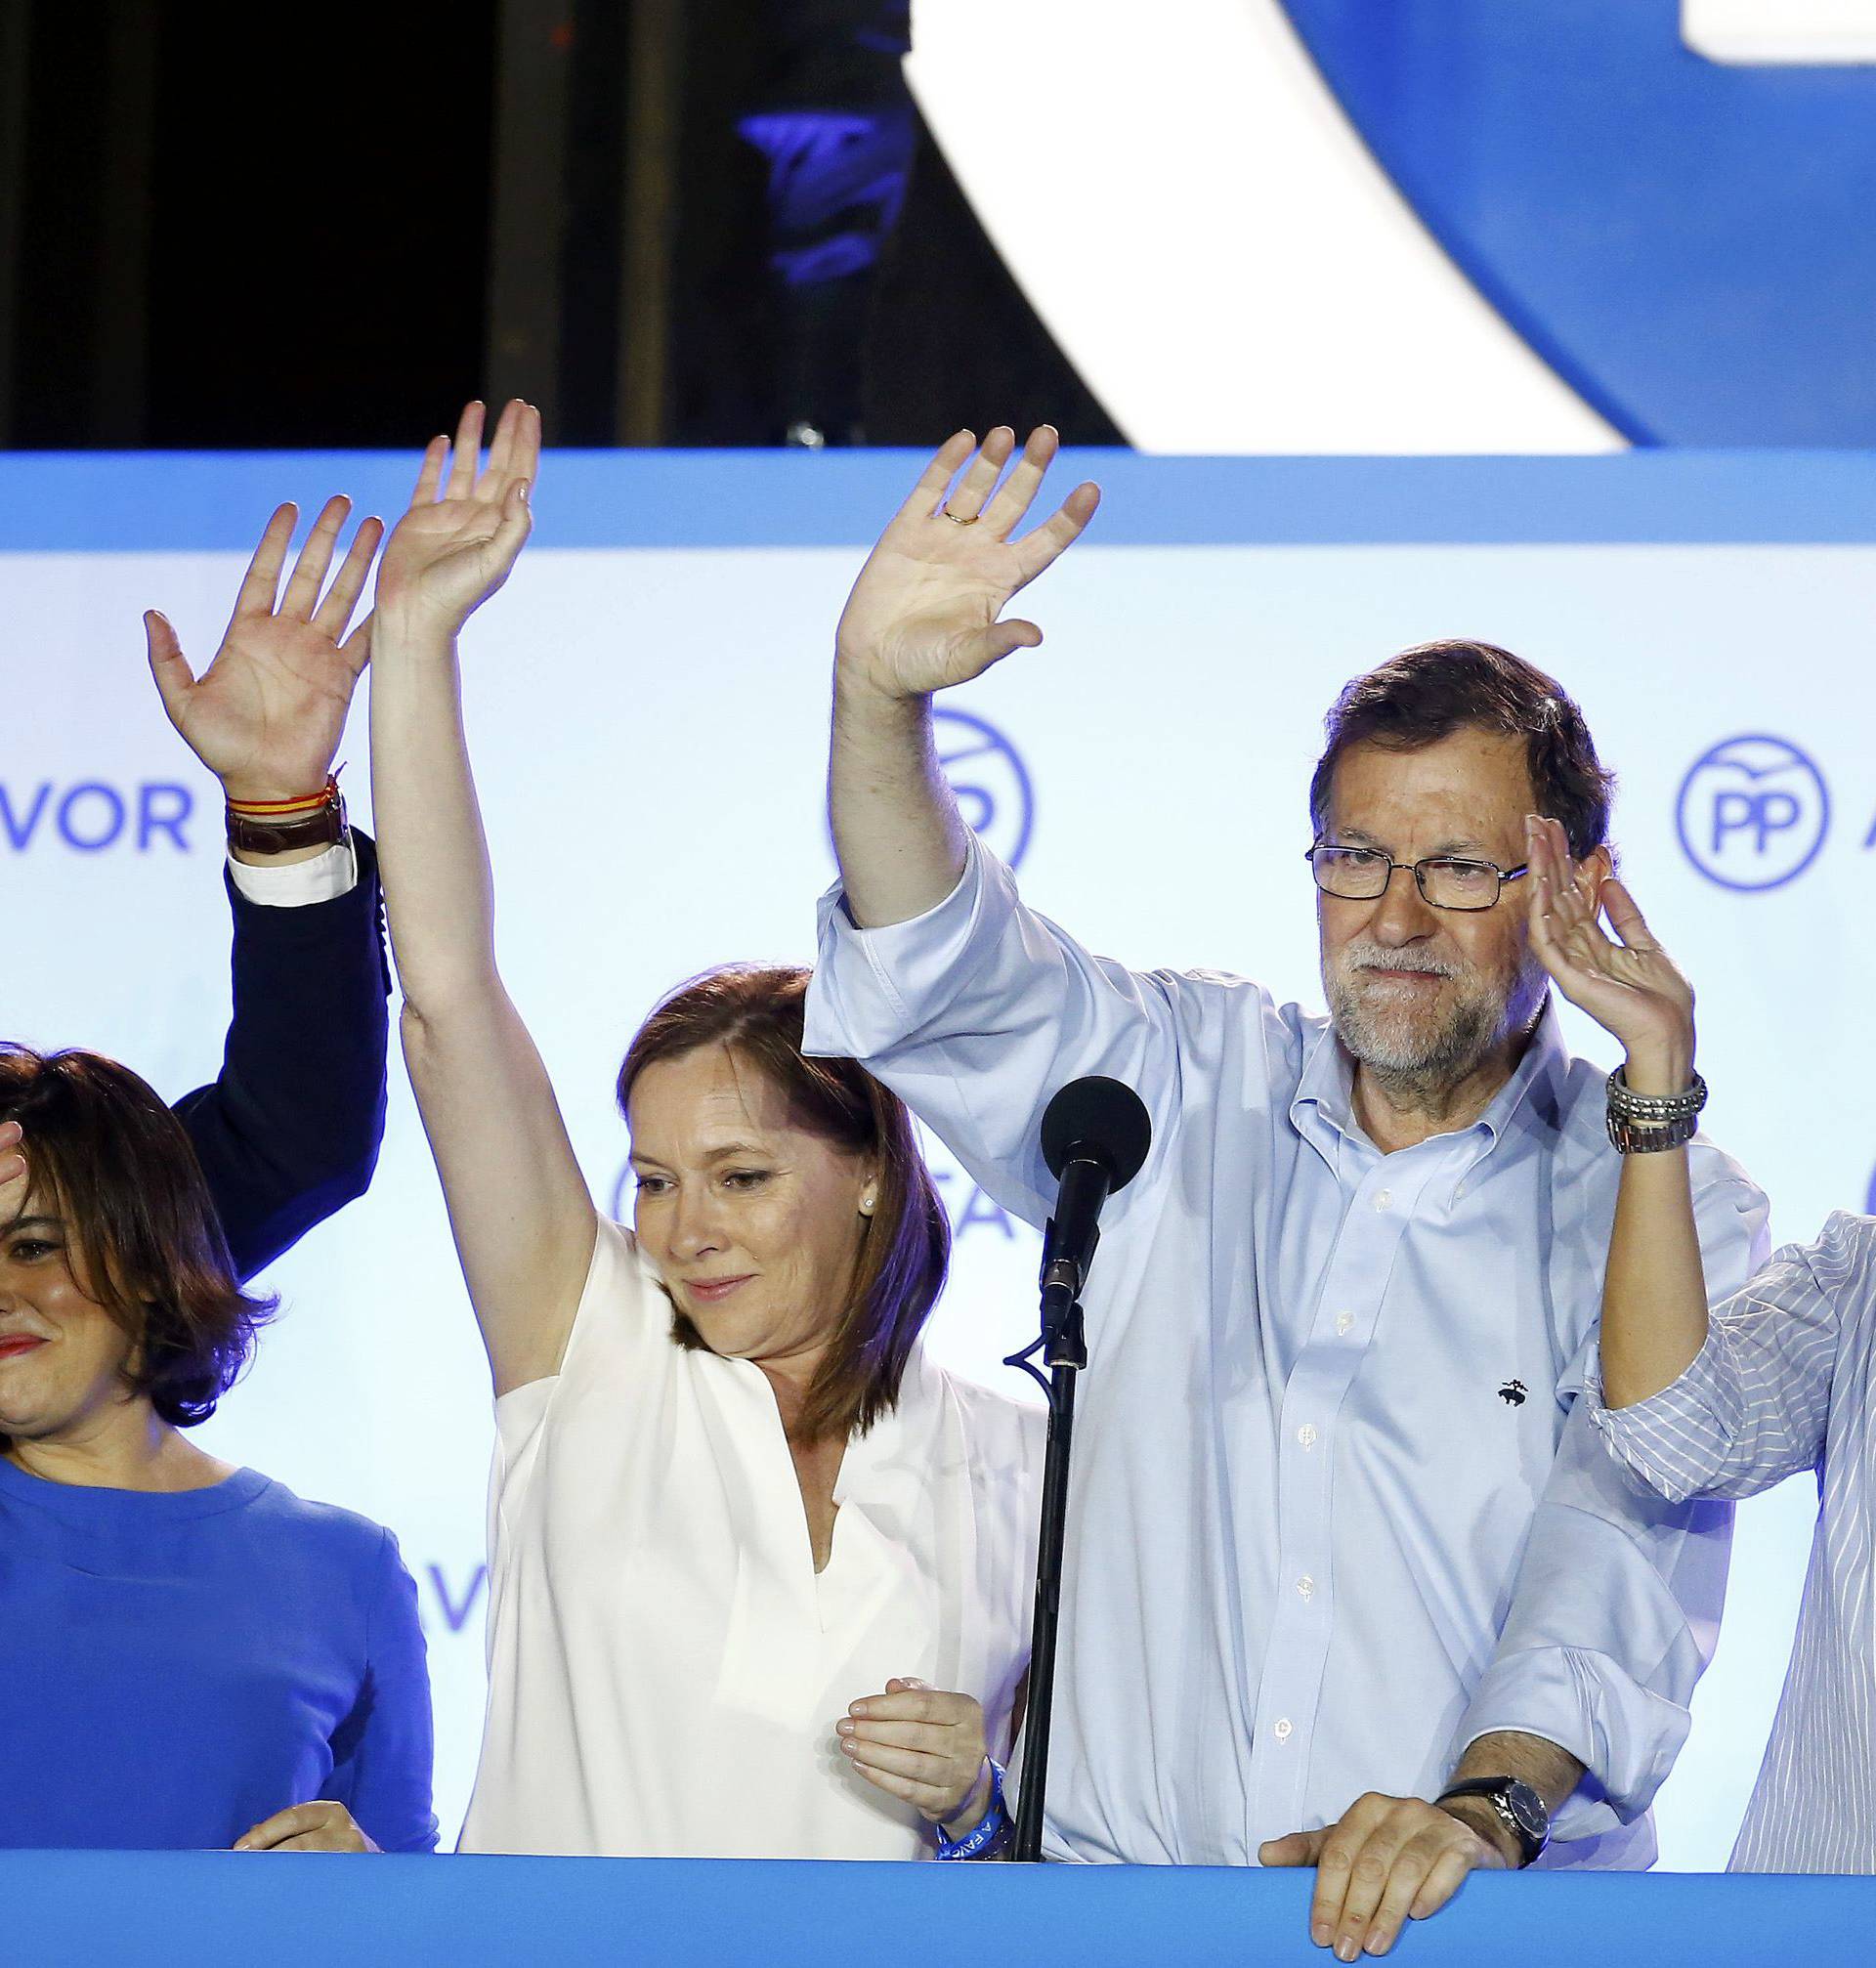 Spain's acting prime minister and People's Party (PP) leader Mariano Rajoy waves to supporters at party headquarters after Spain's general election in Madrid